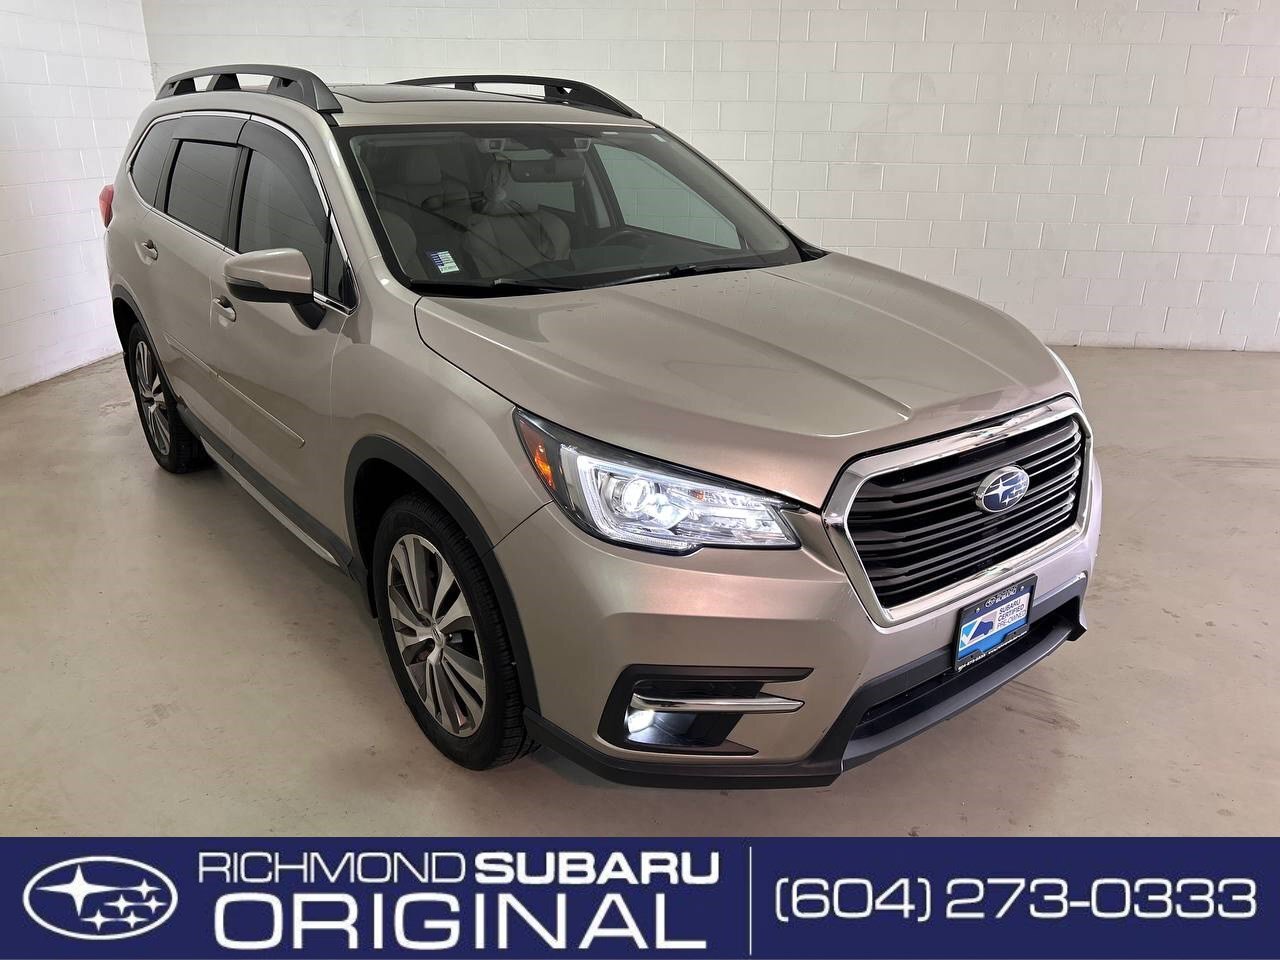 2019 Subaru Ascent Limited | 19 CUP HOLDERS | CALL TO RESERVE